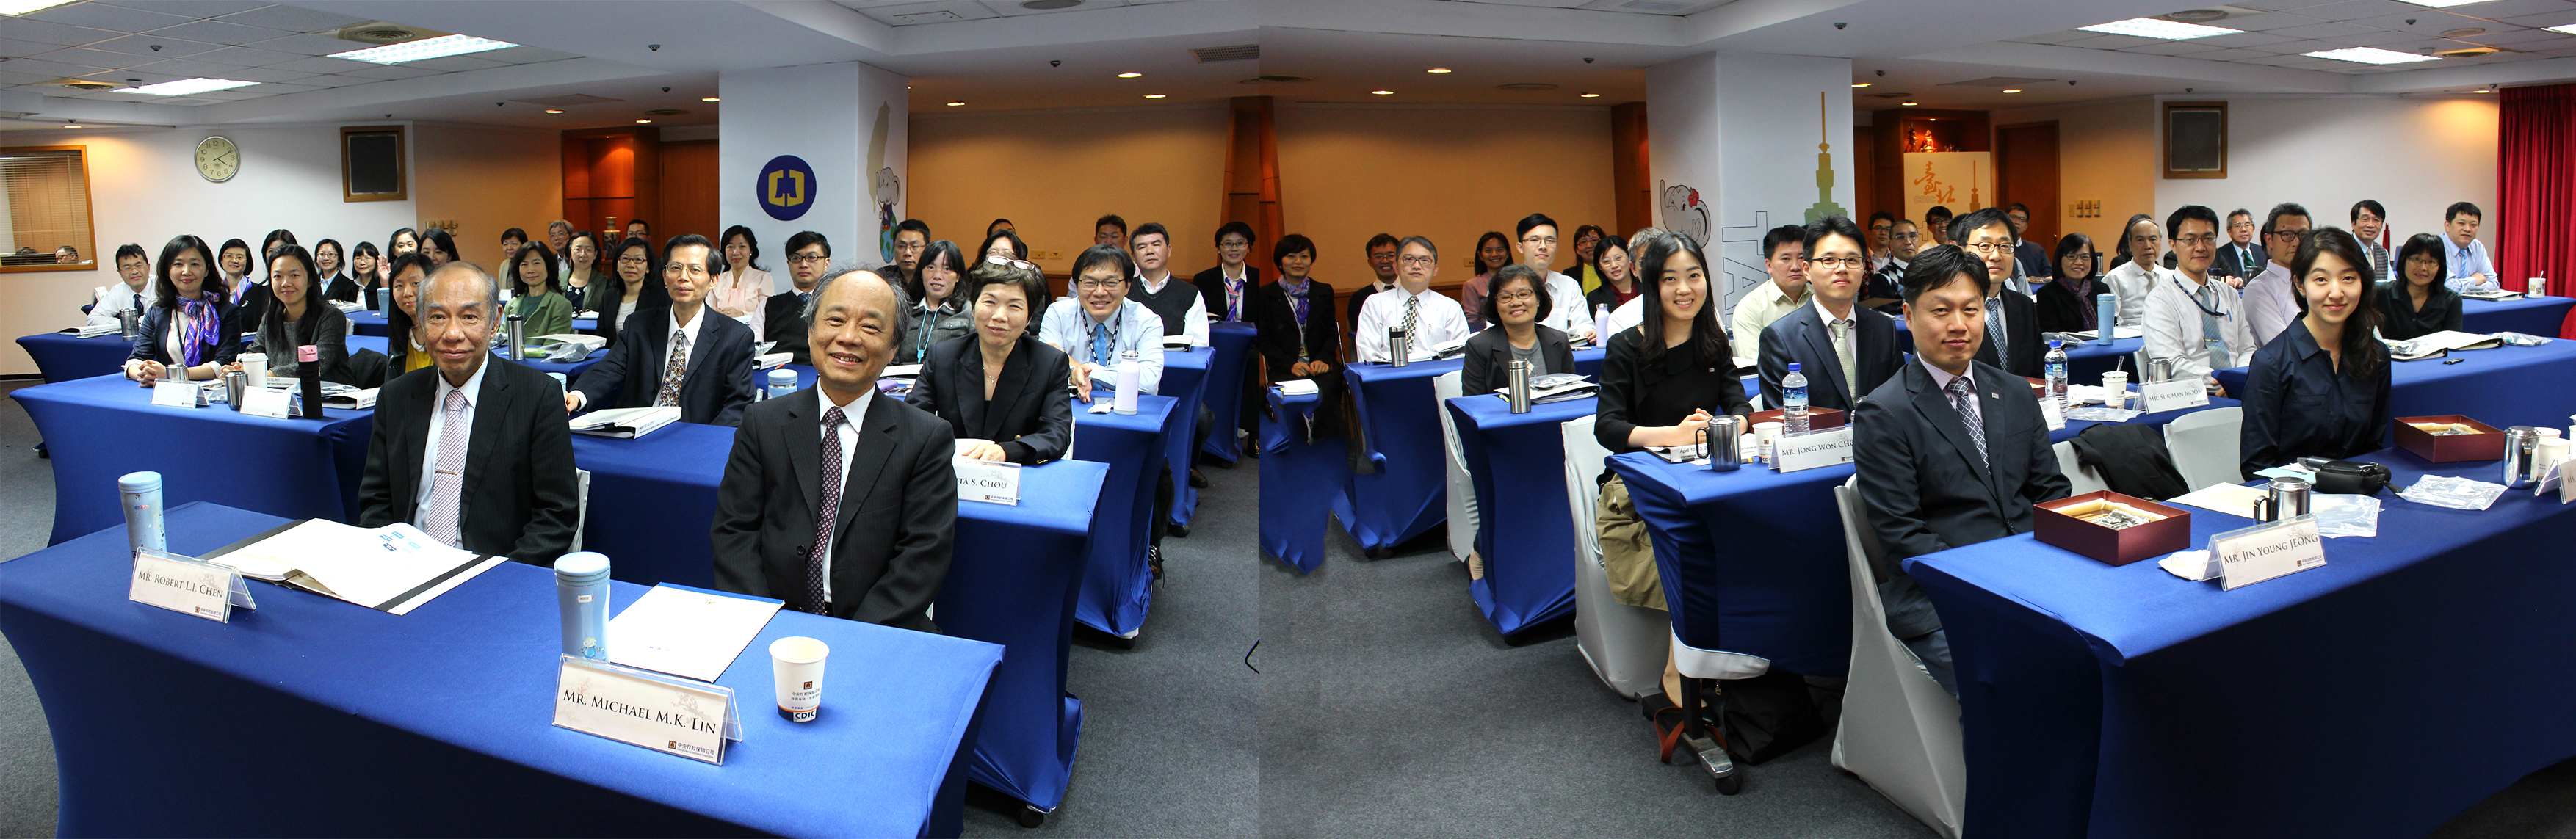 Group photo of the participants in the CDIC International Training Seminar on Deposit Insurance Policies and Management.